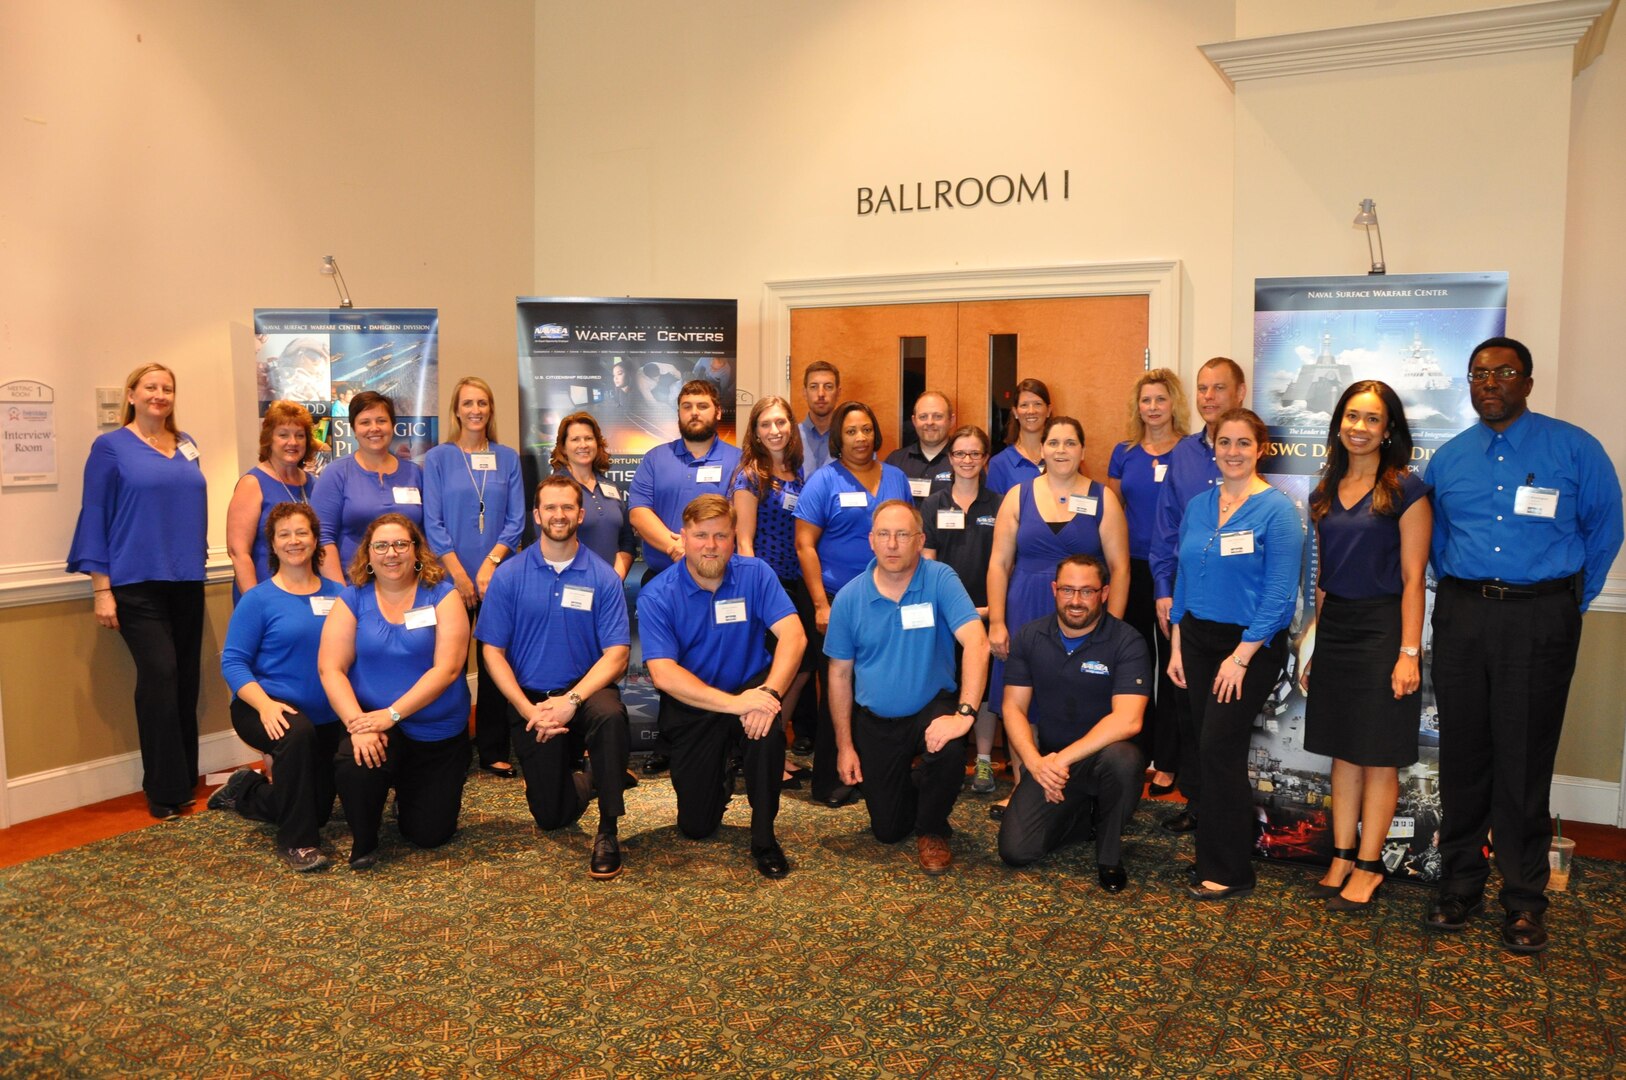 Employees of the Naval Surface Warfare Center Dahlgren Division (NSWCDD) pose for a photo before the start of a job fair held at the Fredericksburg Expo and Conference Center, July 18. The command's Human Resources Division announced Aug. 2 that it plans to make about 100 tentative job offers to candidates who attended the event. Approximately 325 candidates with bachelor's, master's, and doctoral degrees in biology, chemistry, computer science, engineering, mathematics, and physics spoke with senior Navy scientists, engineers, and managers about positions available for entry-level and experienced scientists and engineers.